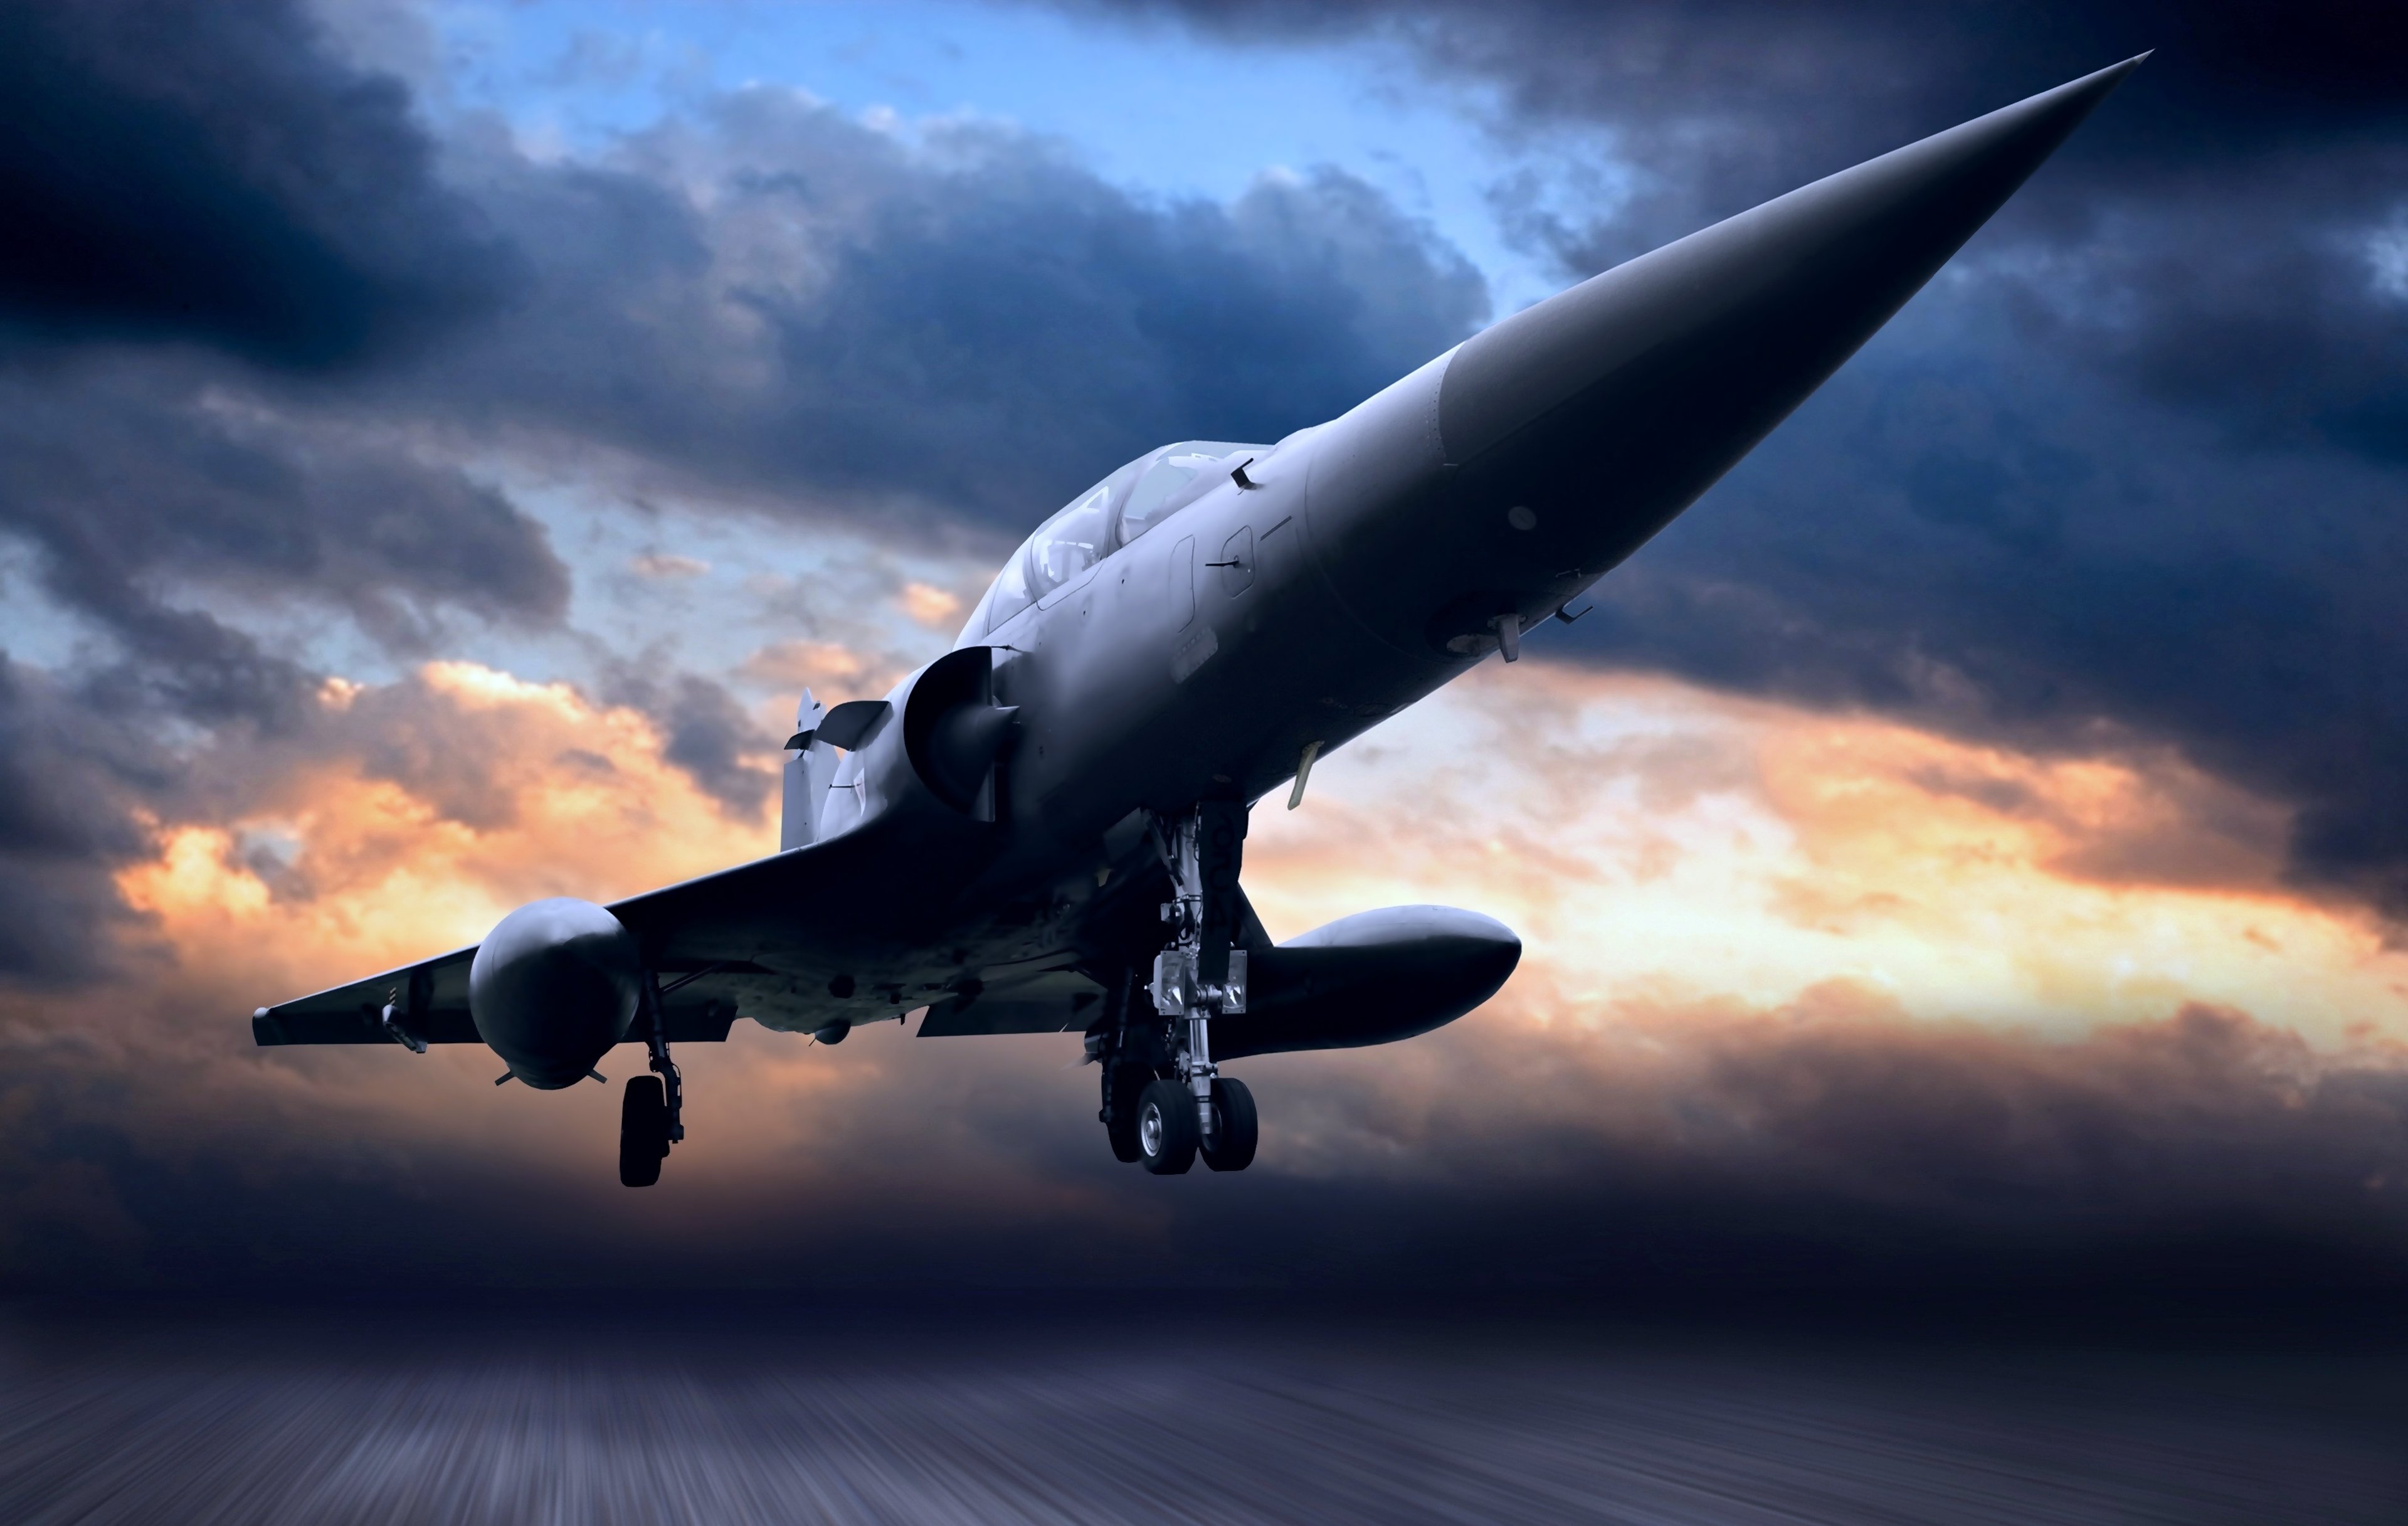 aircrafts, Attack, Bombing, Clouds, Earth, Flights, Landscapes, Military, Nature, Review, Sky, Warplanes Wallpaper